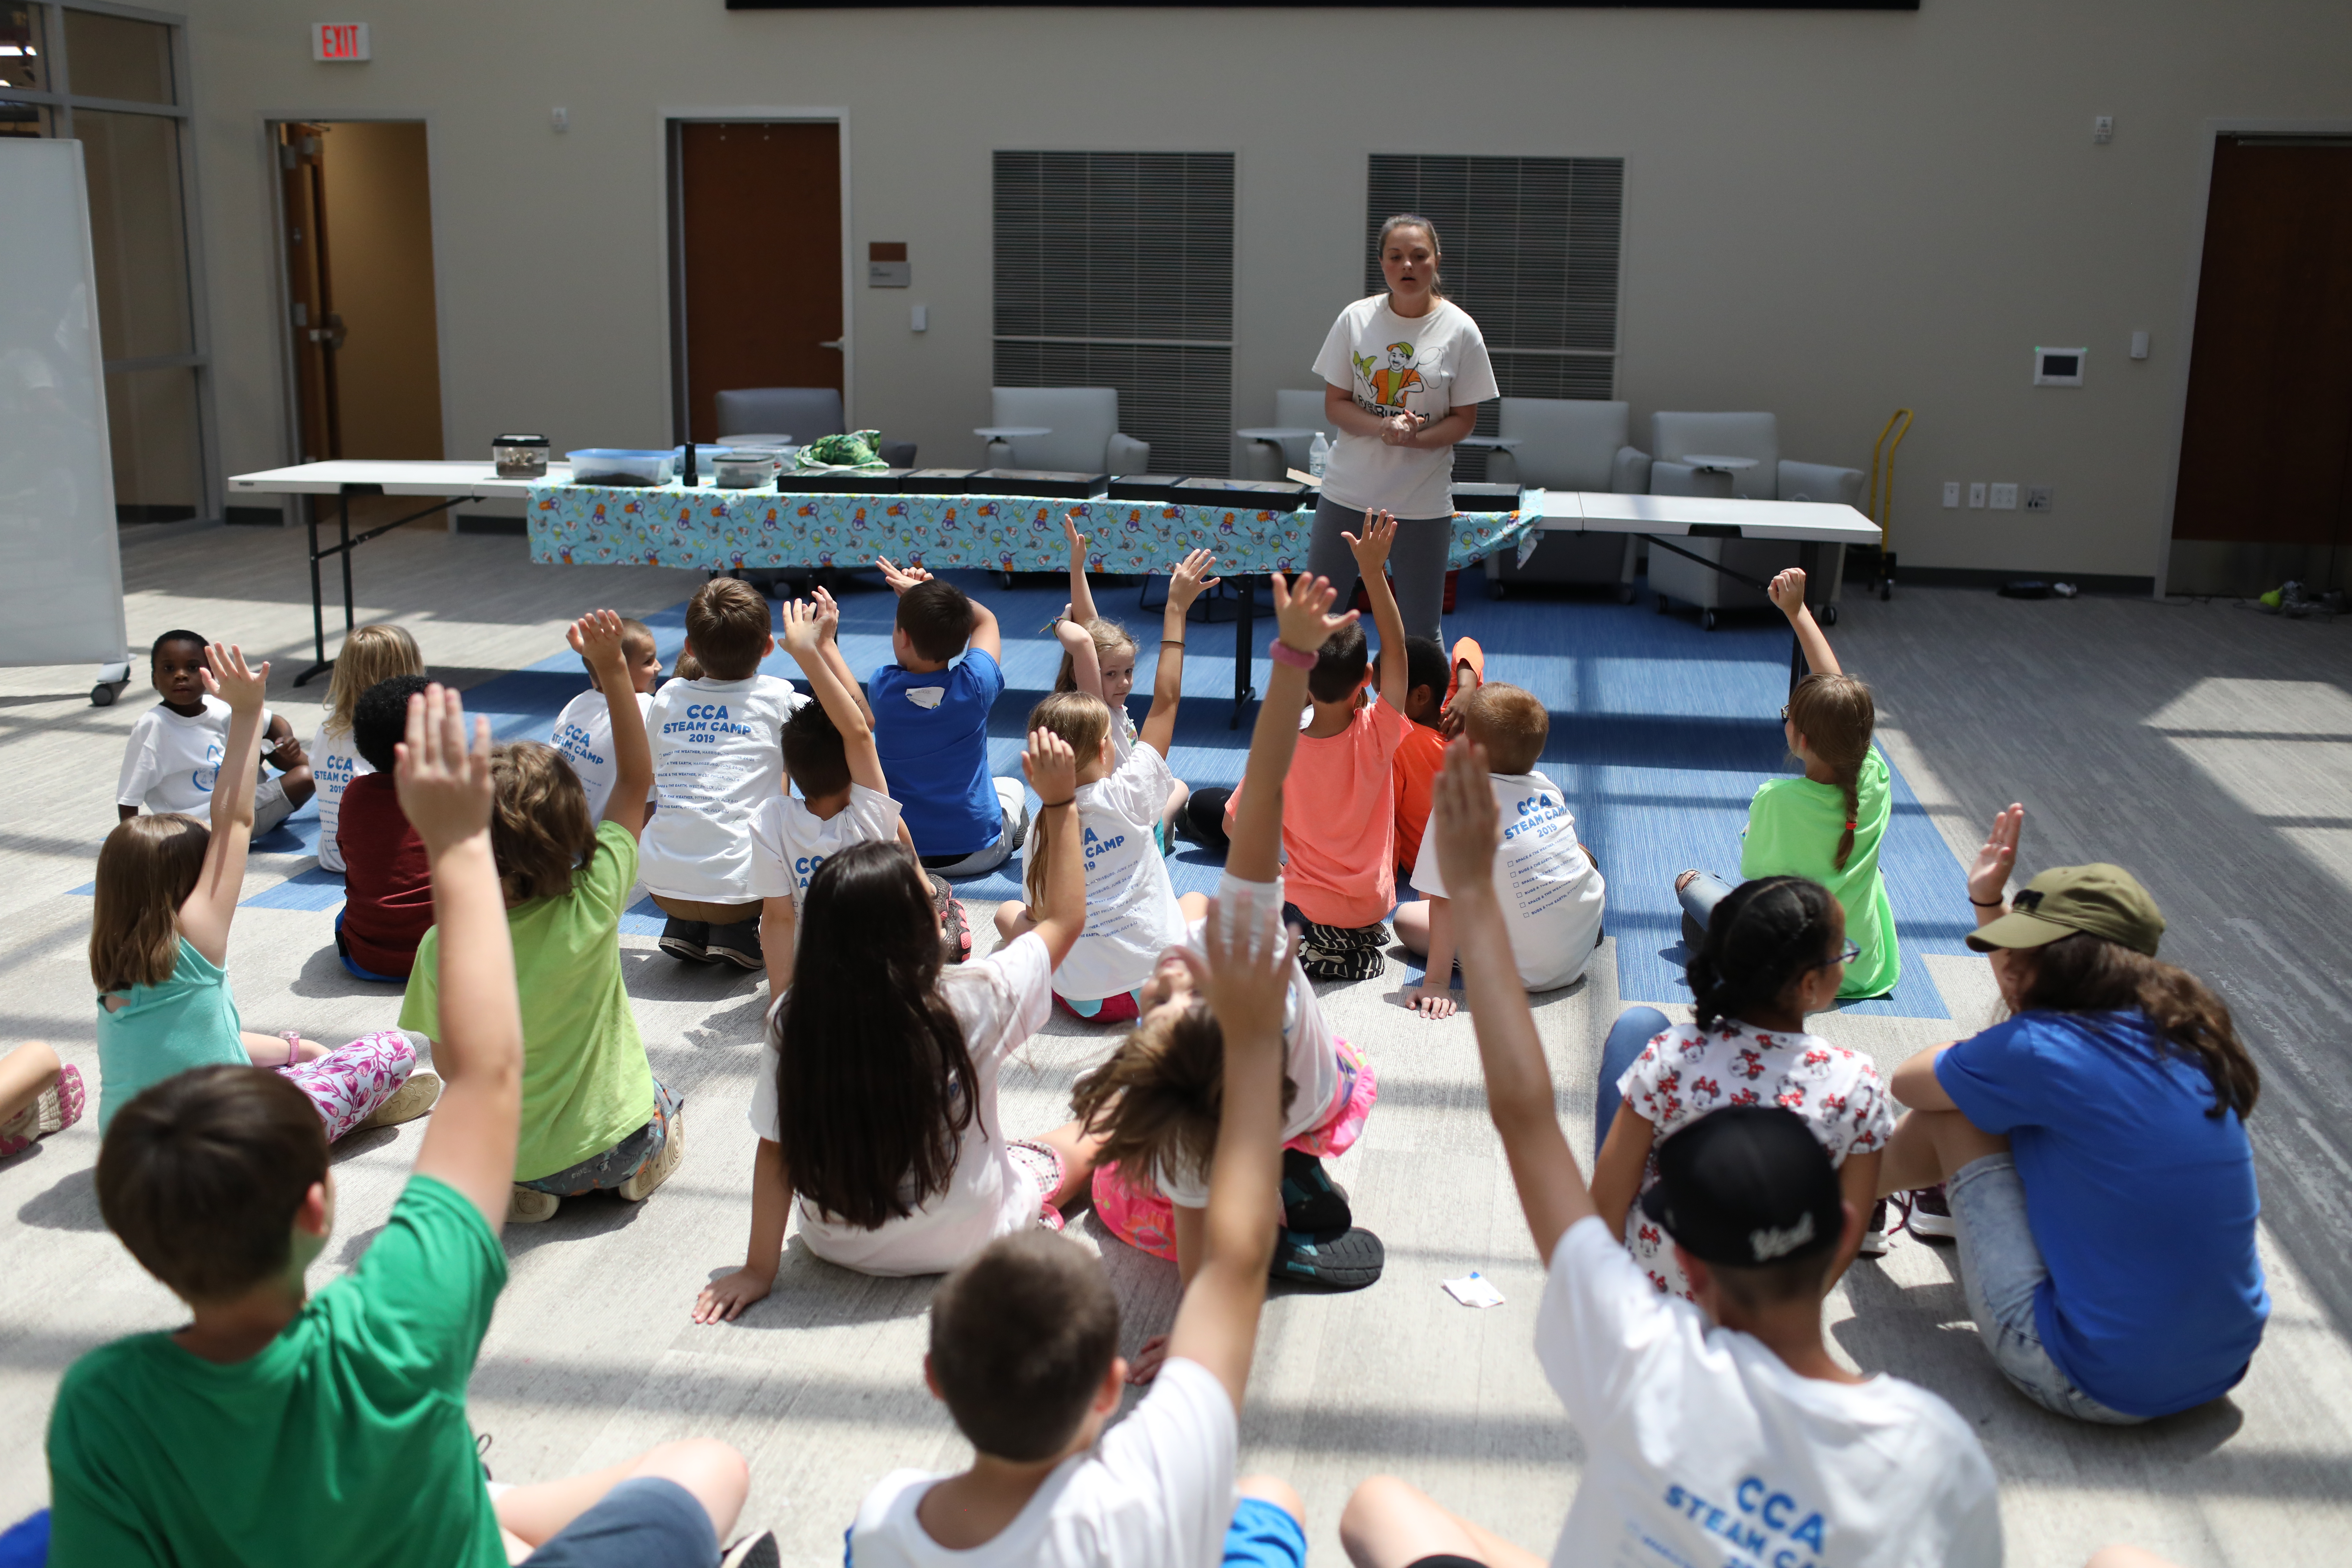 CCA students raising their hands at a STEAM camp event